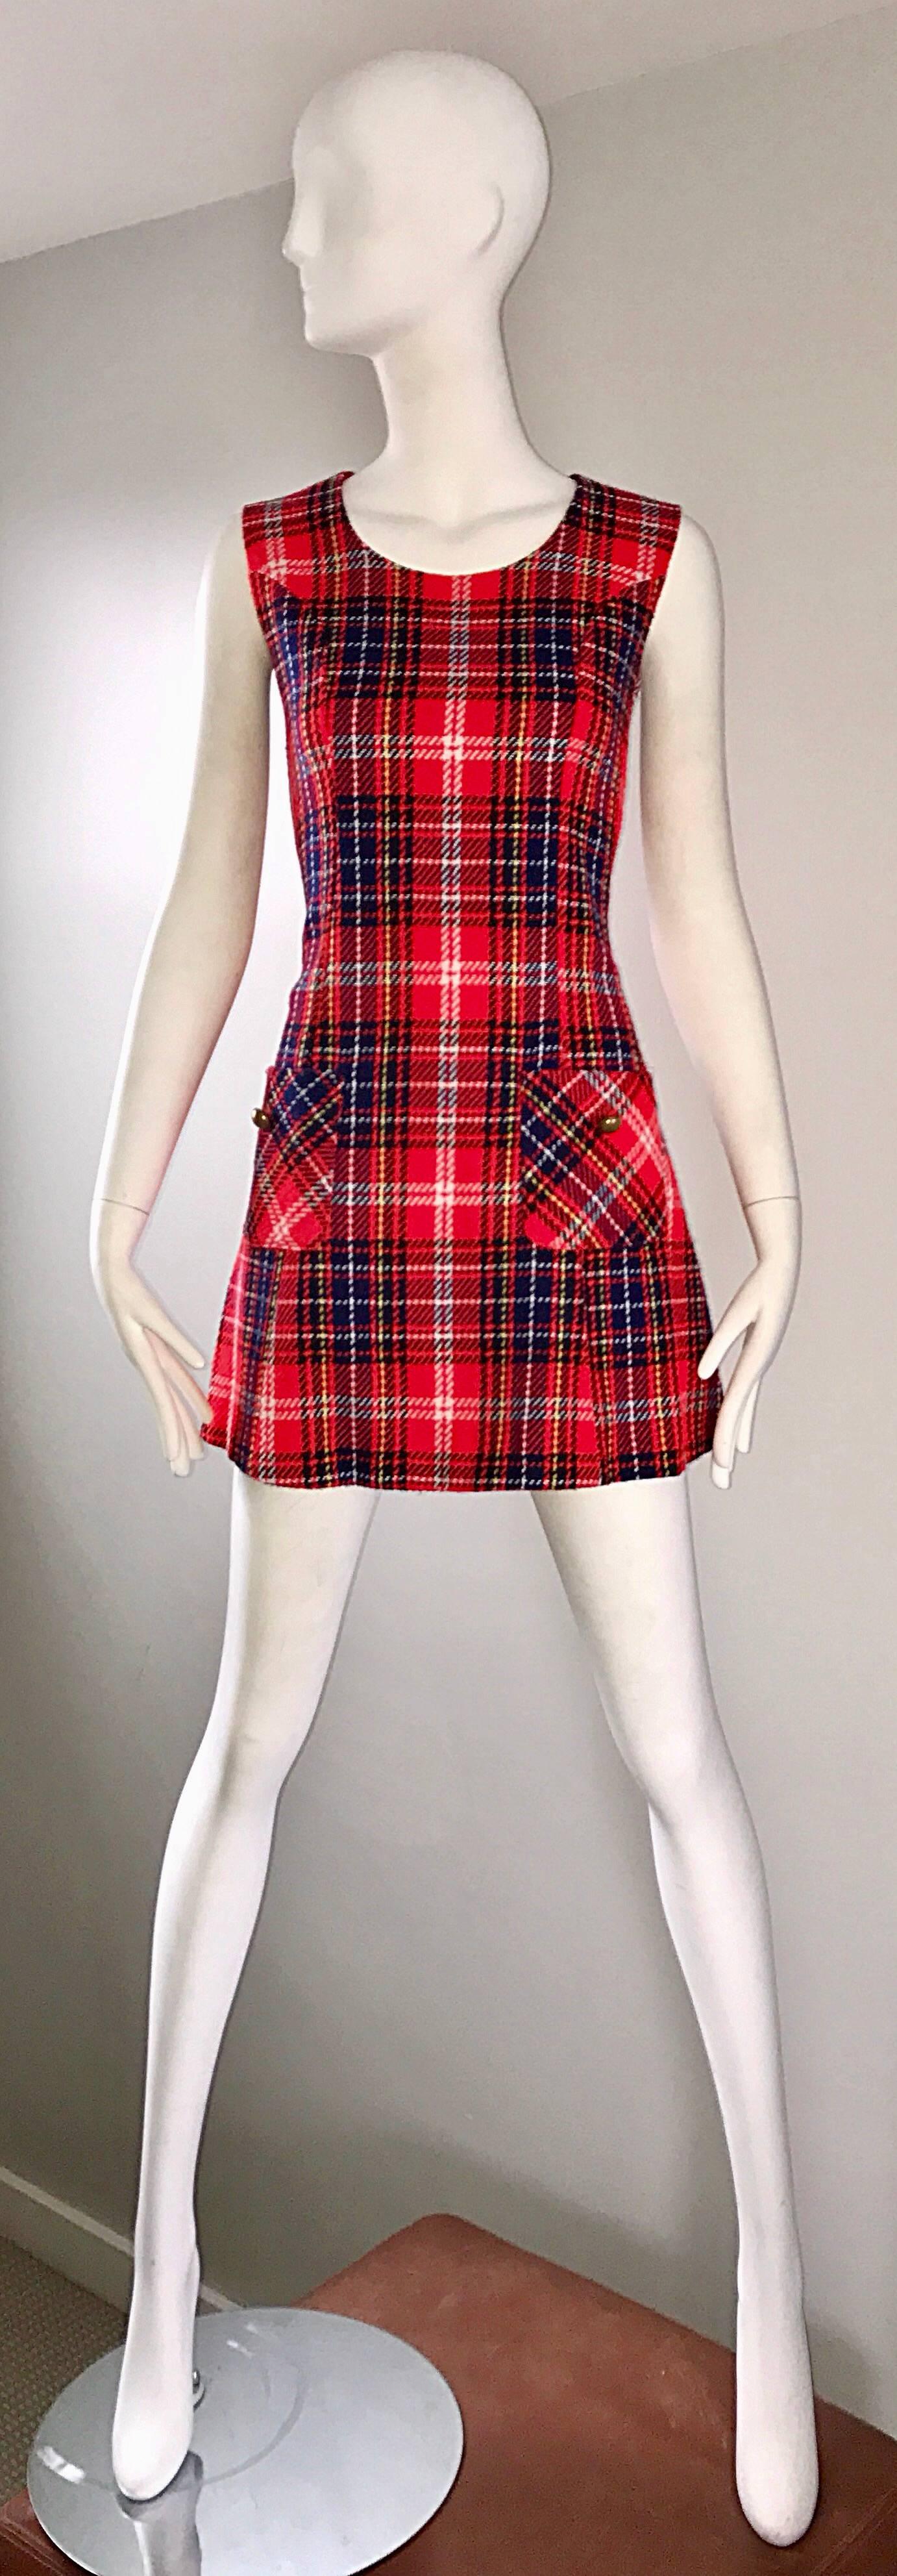 Chic 1960s tartan plaid scooter A-line dress! Features vibrant cherry red, navy blue, and yellow plaid throughout. Pocket at each side of the waist, with a brass gold button on each. Full metal zipper up the back with hook-and-eye closure. Flirty